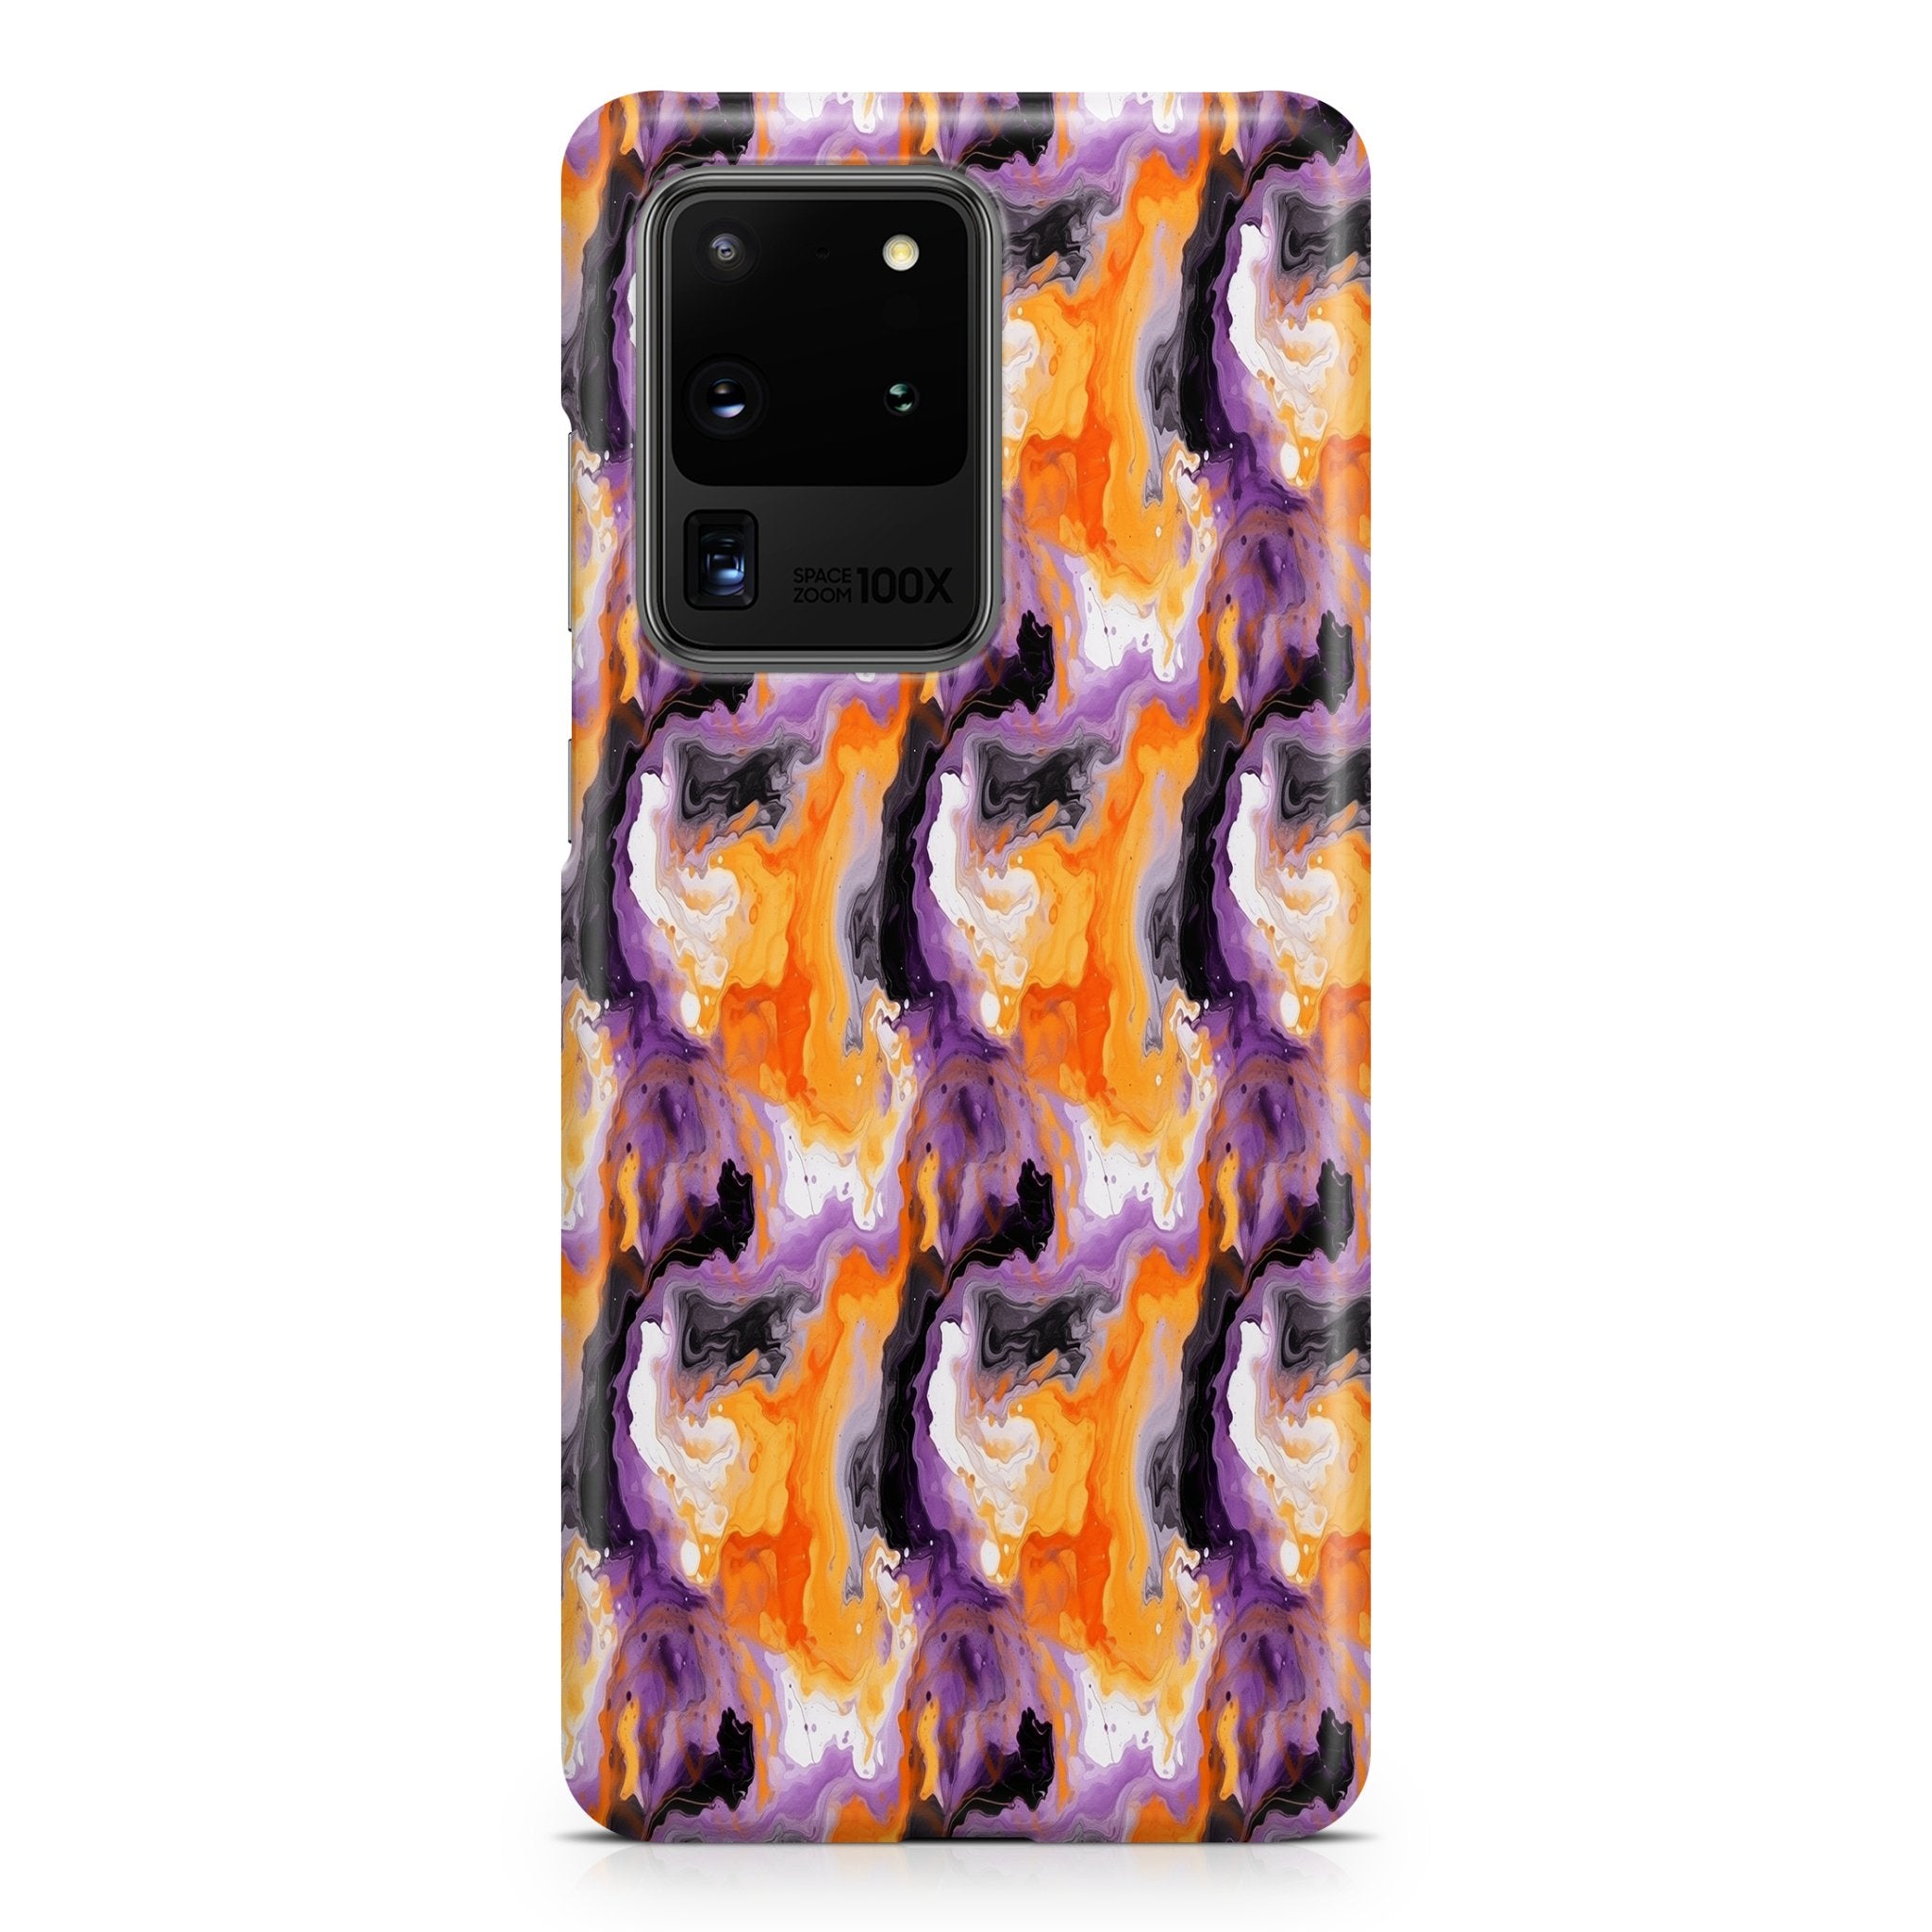 Halloween Palette - Samsung phone case designs by CaseSwagger